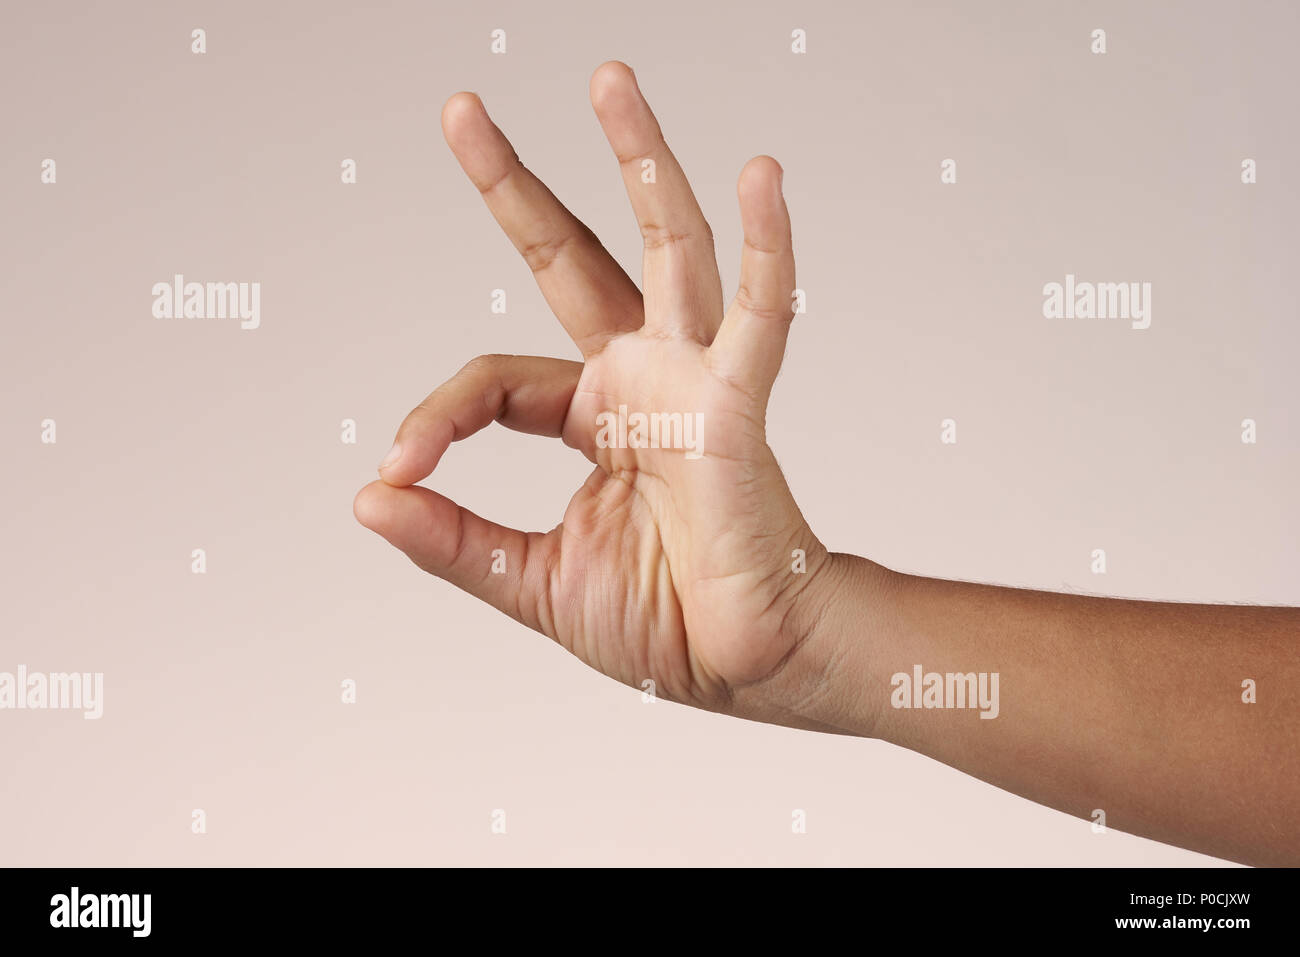 Hand show ok sign isolated on brown background Stock Photo